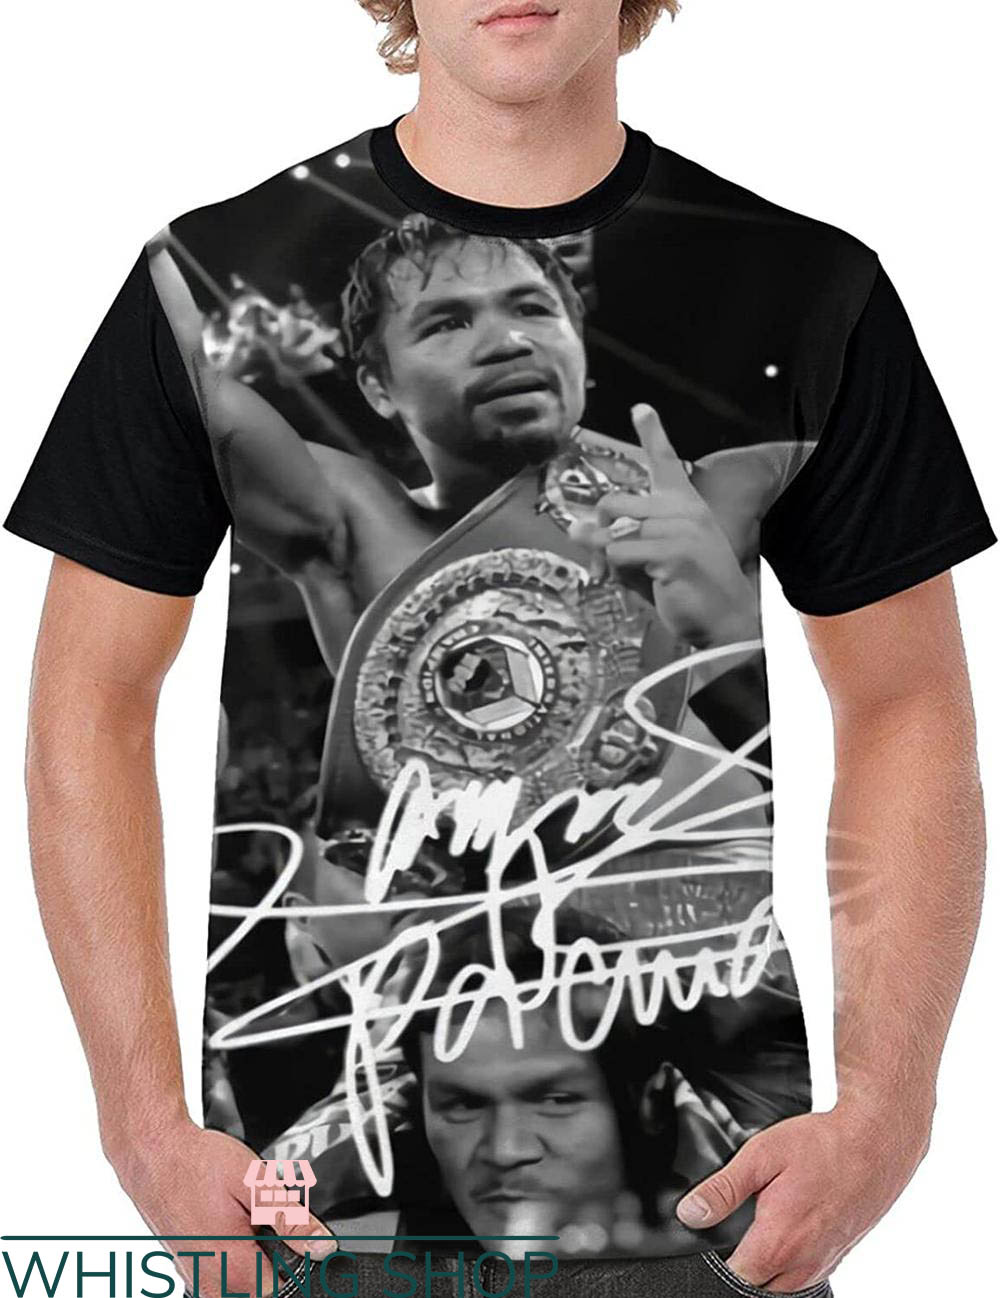 Manny Pacqiao T-Shirt Superb Selection Manny Pacquiao Tee